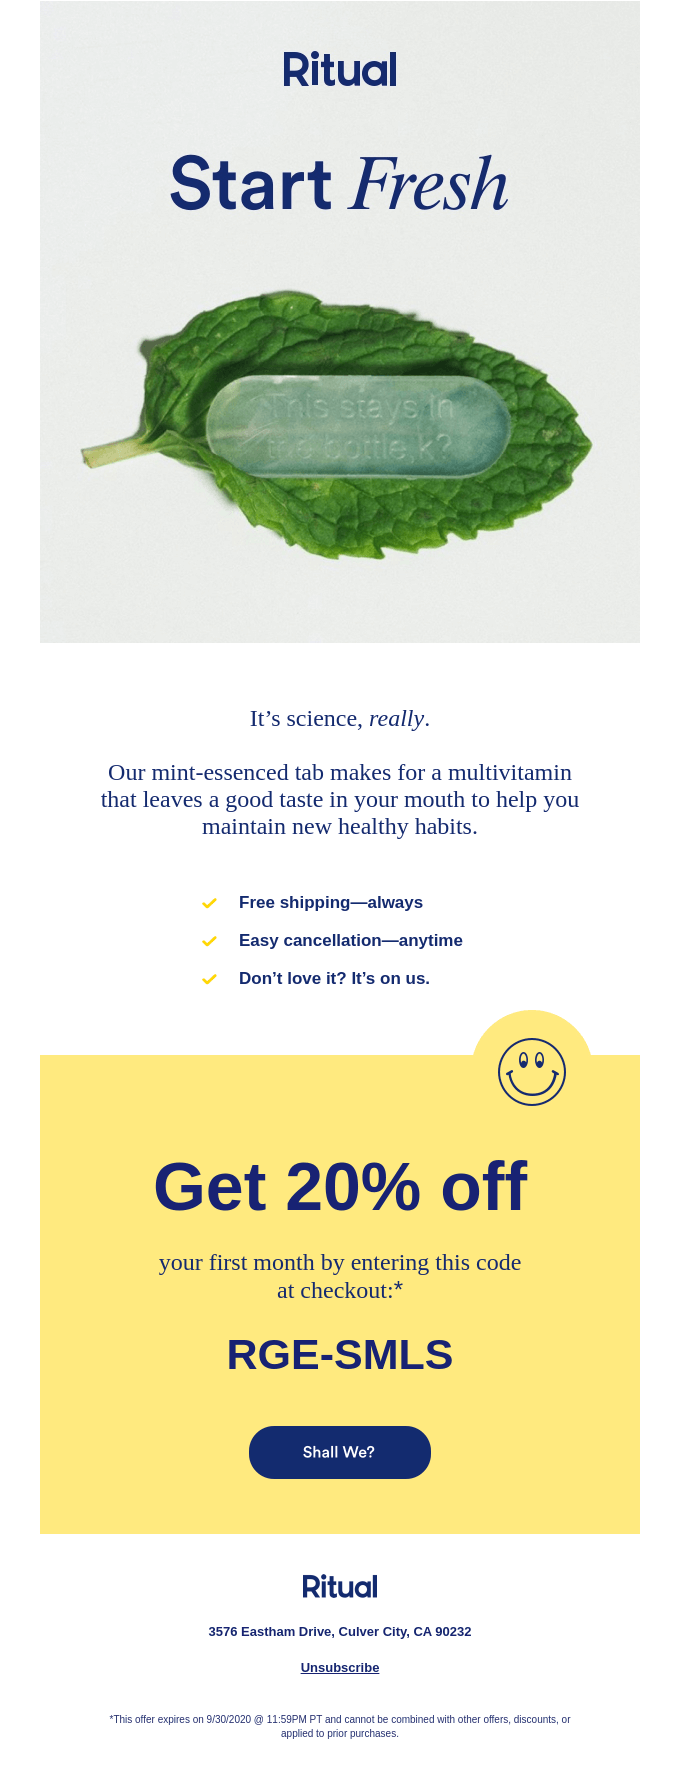 A cool 20% off